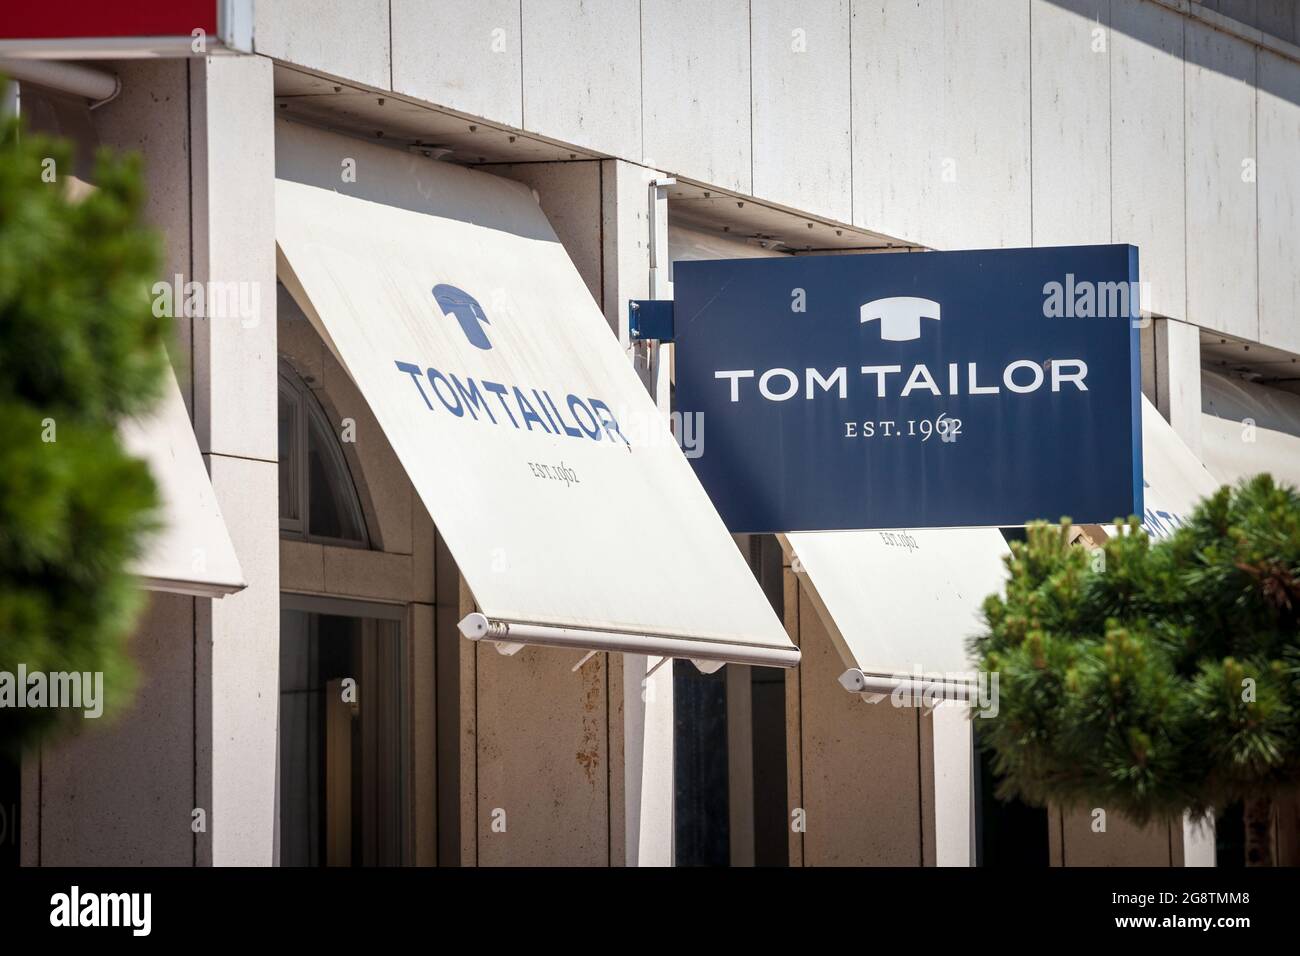 hi-res Tom - and photography images Alamy tailor stock logo